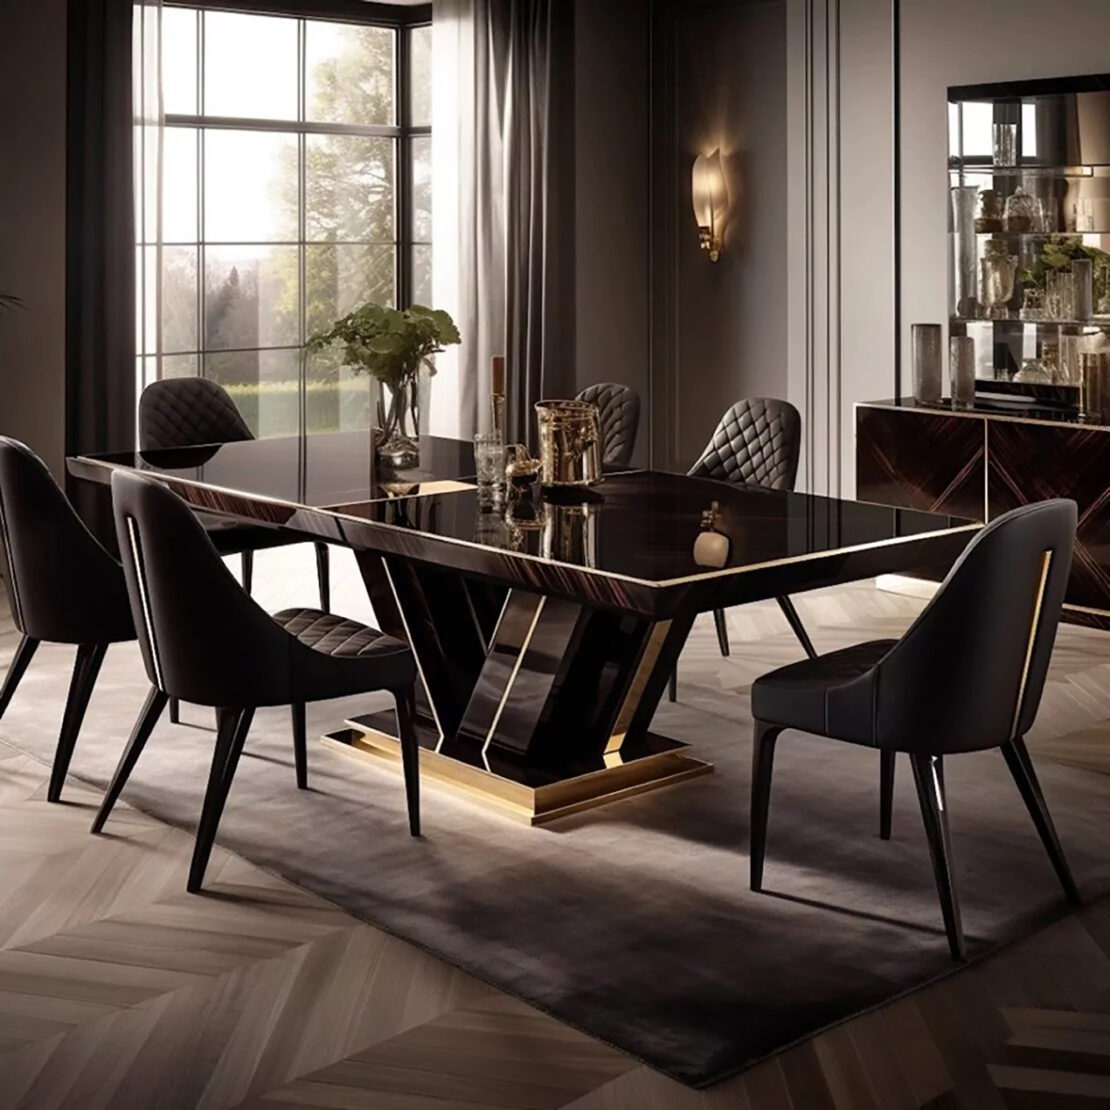 Stunning abstract dining table and chairs designed and manufactured with the assistance of AI